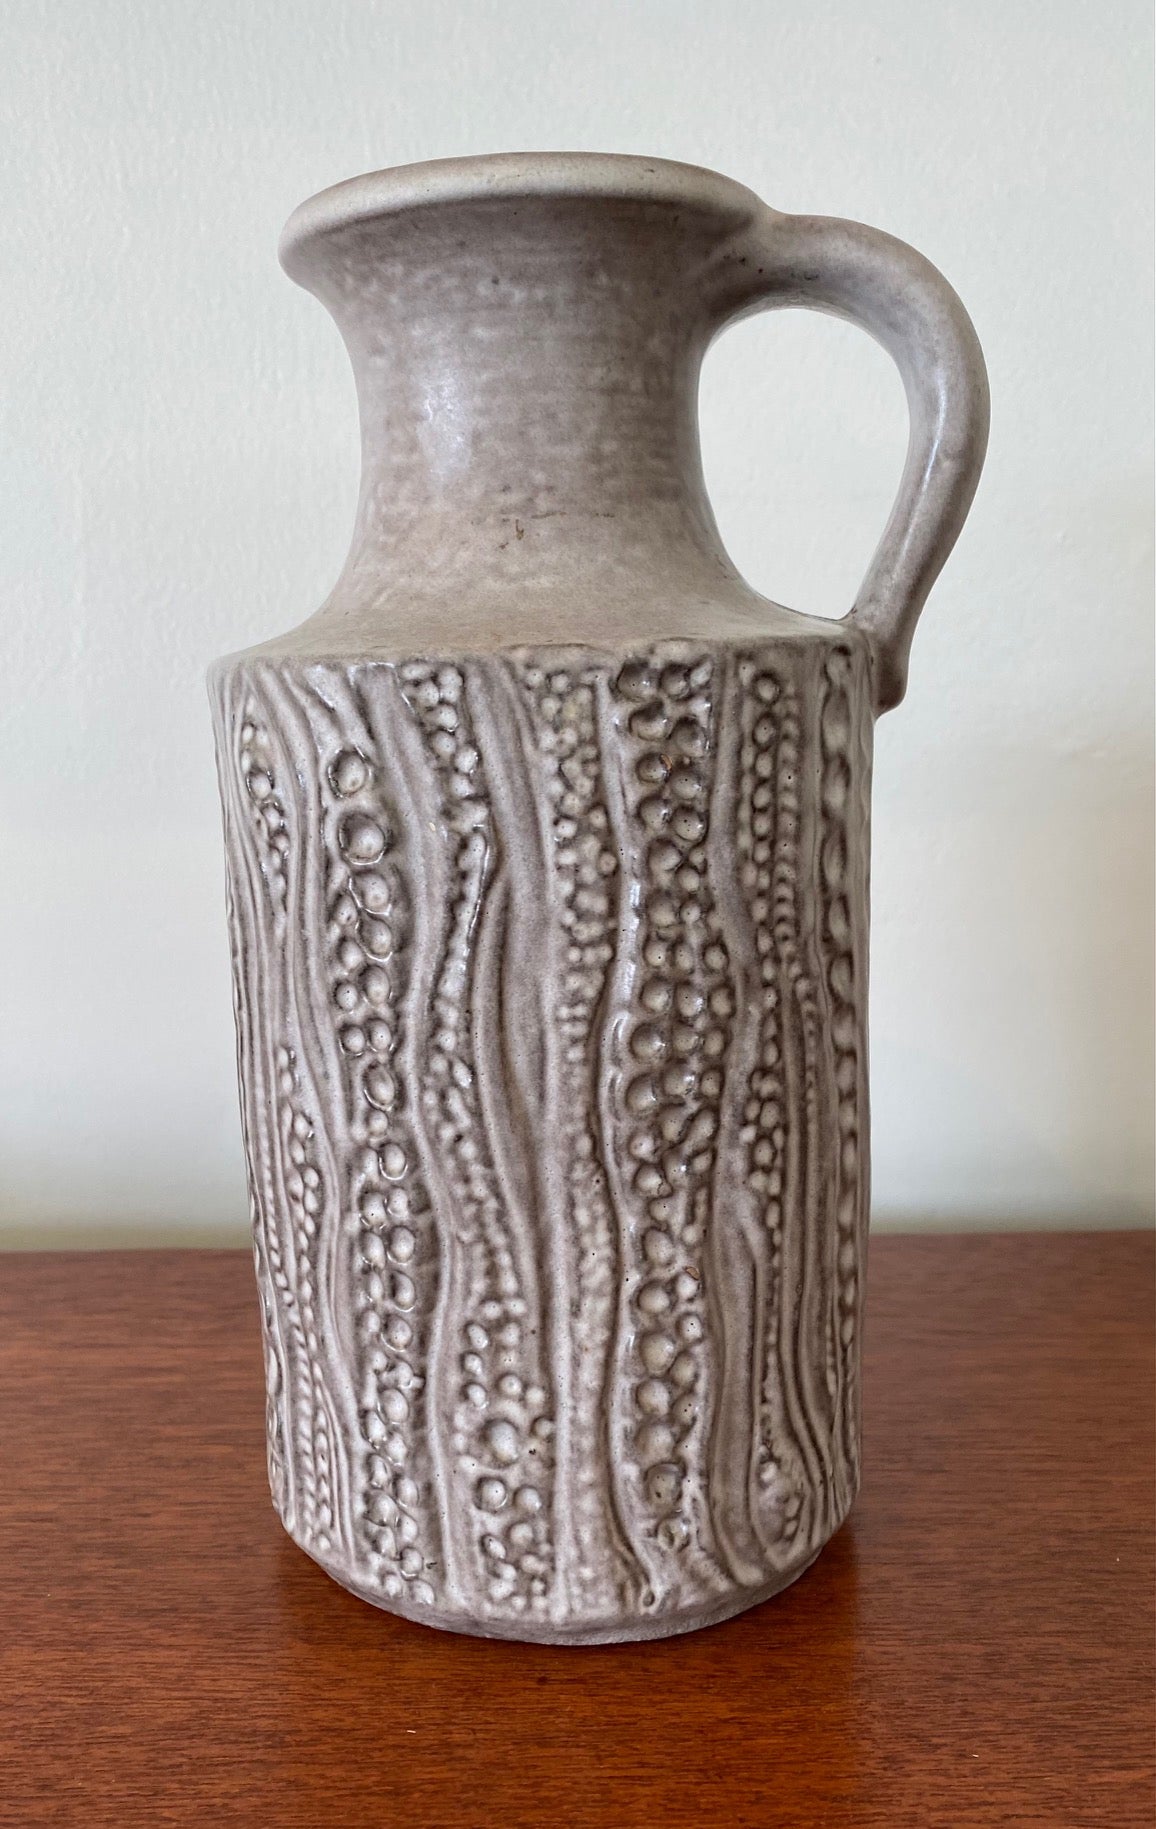 Beautiful West German handled vase with milky white matt glaze.  Gorgeous organic dimpled textured pattern. Marked 1853-25 West Germany on base Cook Street Vintage